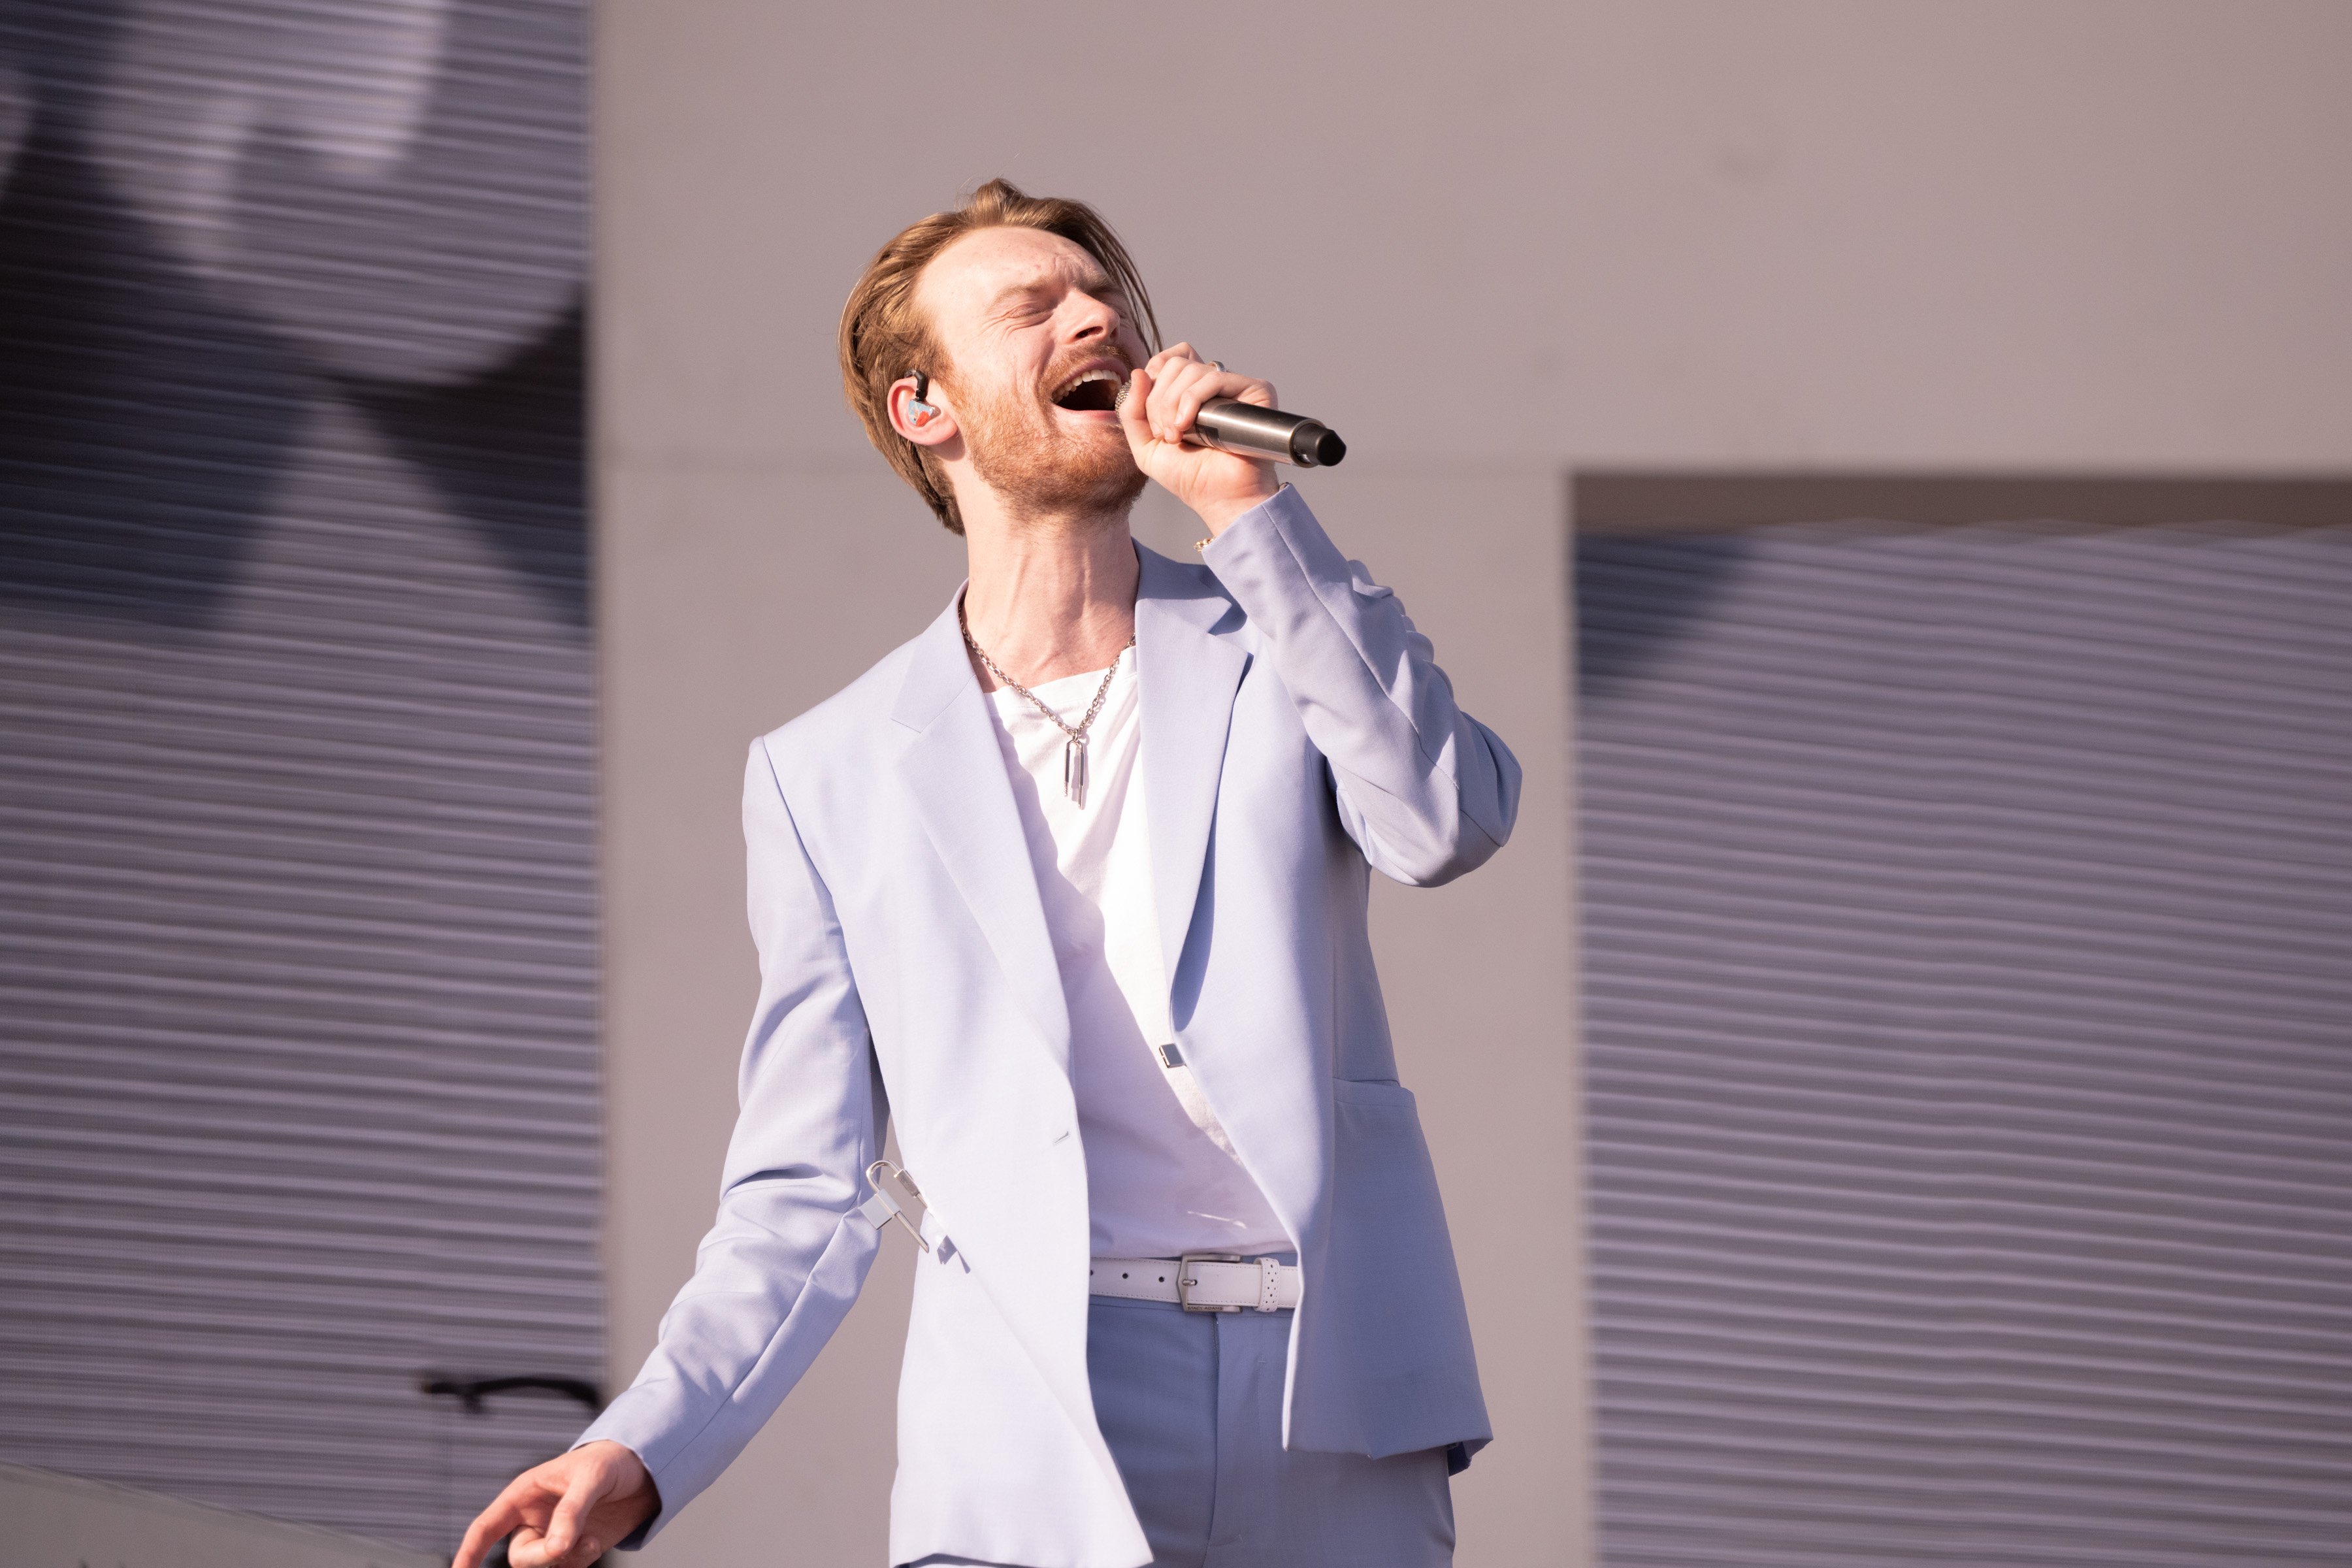 Singer FINNEAS performs on the Outdoor Stage during Weekend 2, Day 2 of the 2022 Coachella Valley Music & Arts Festival